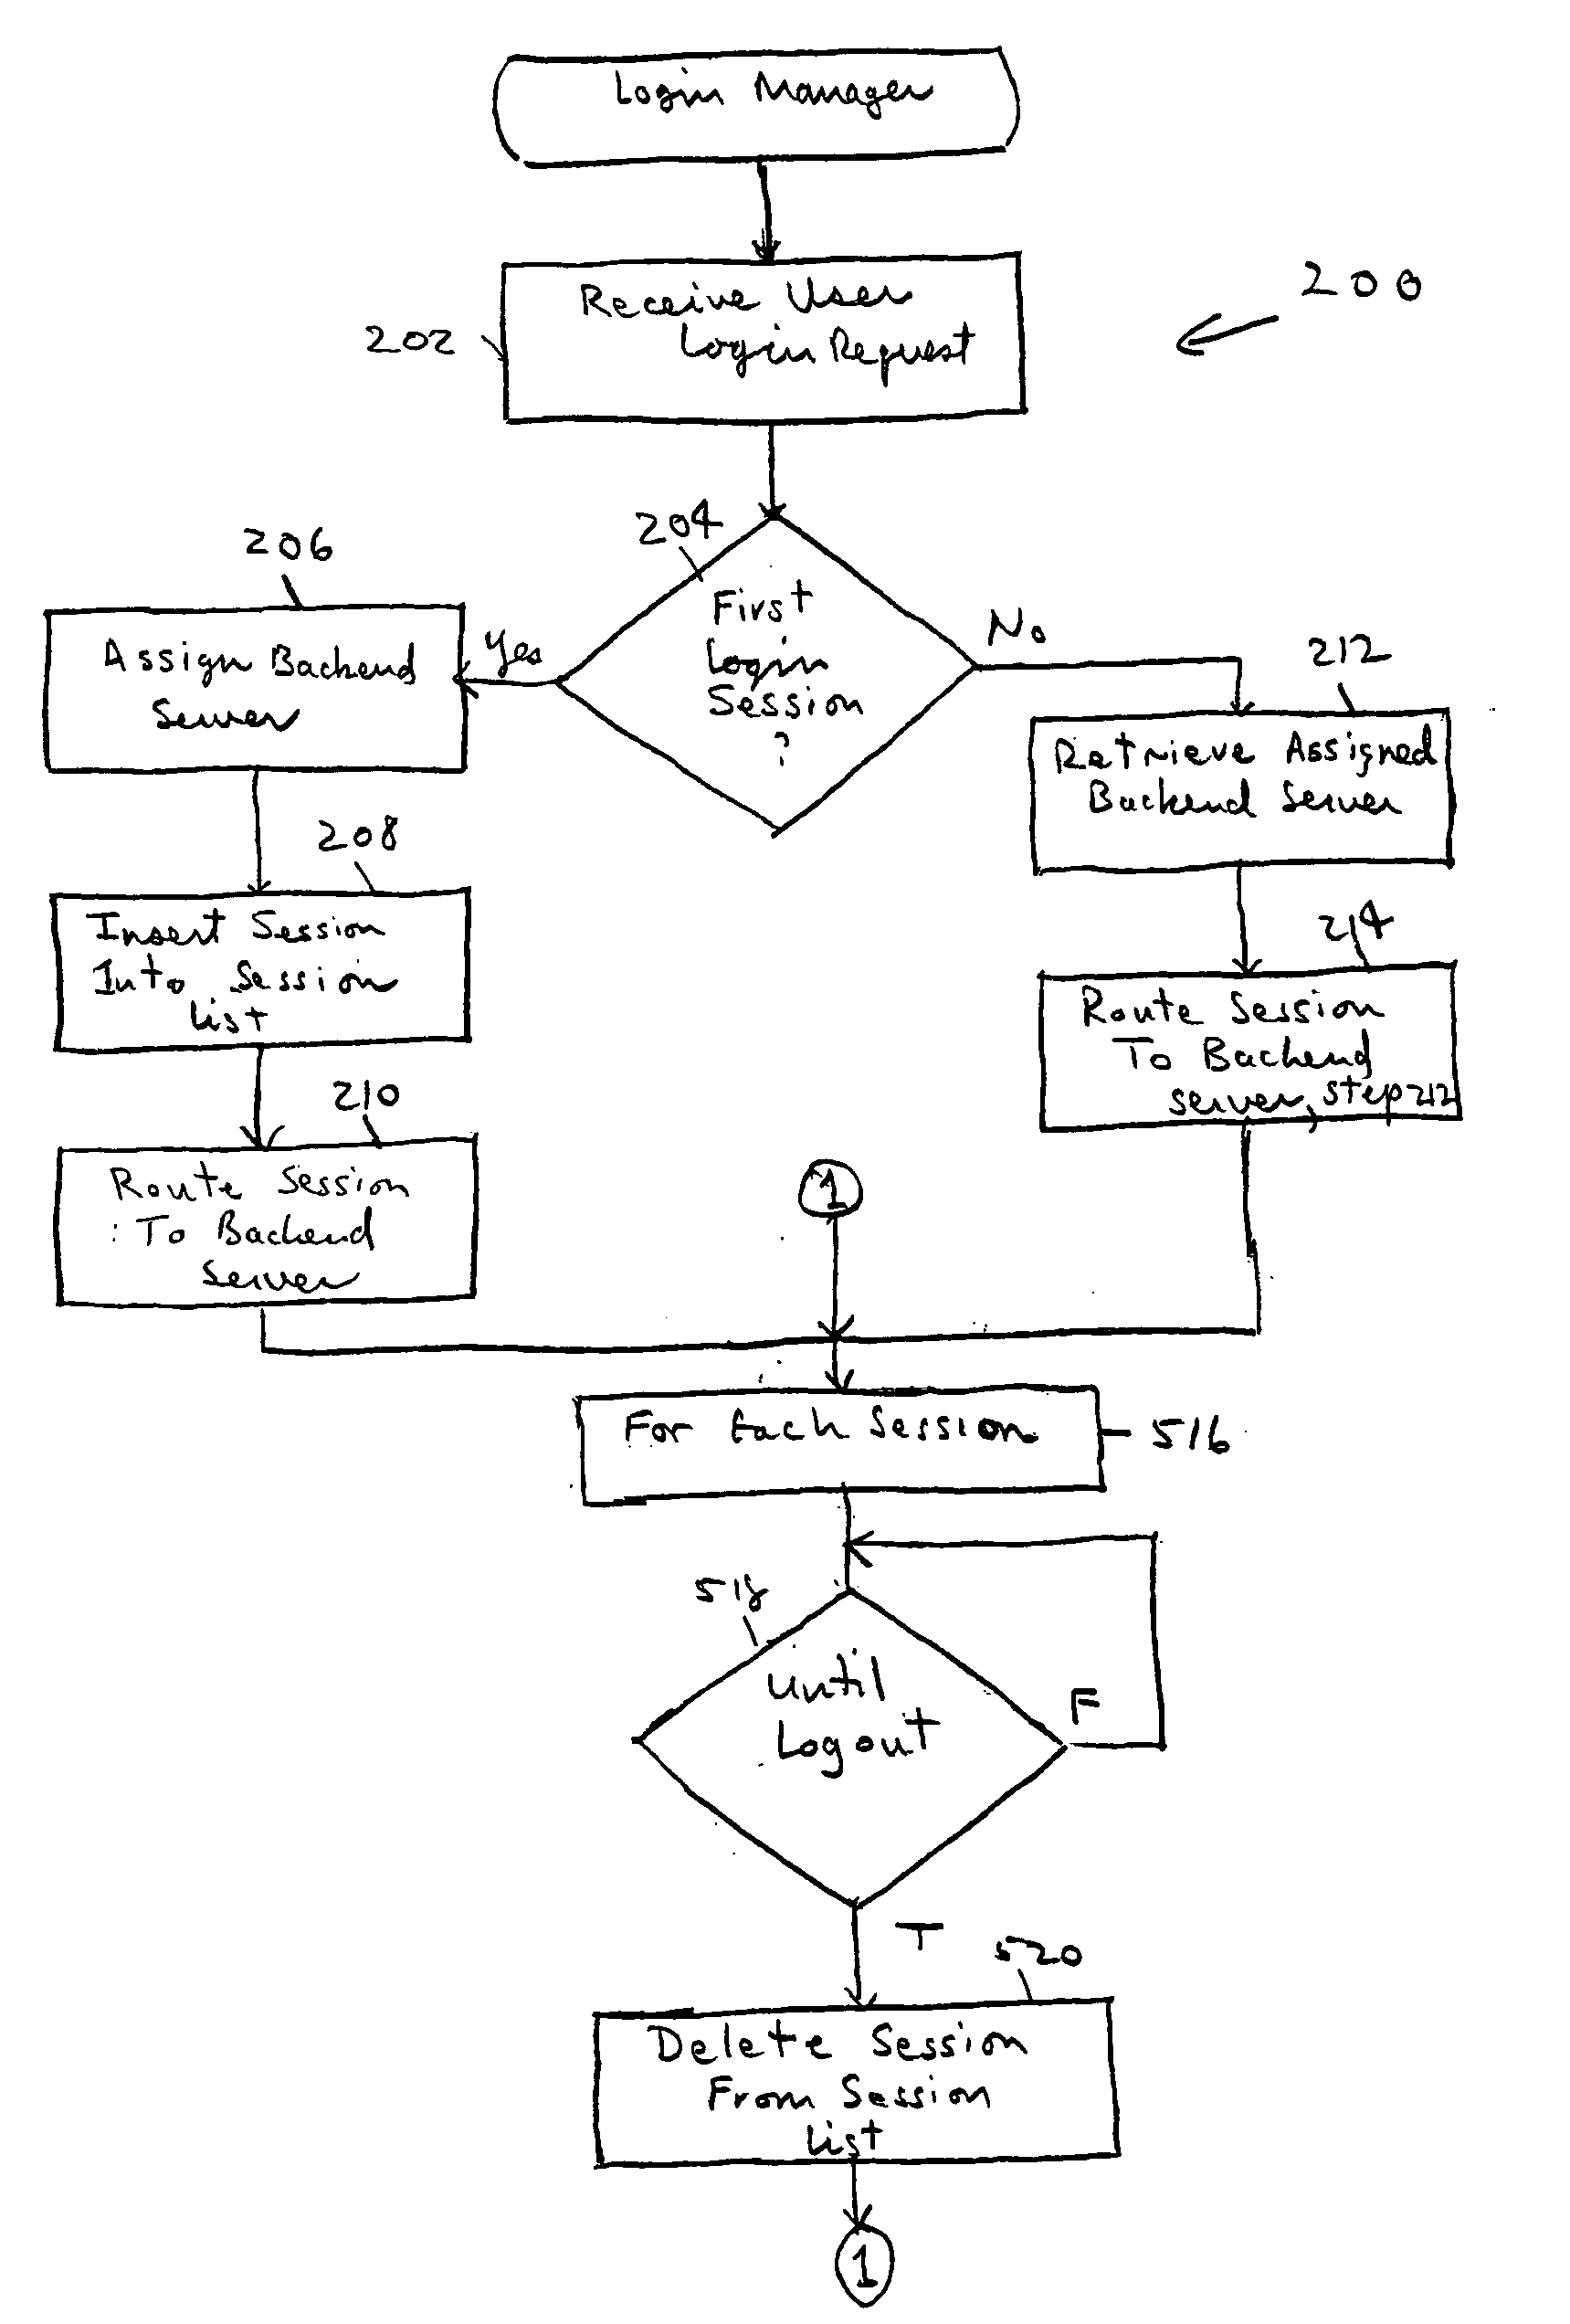 Method and system for multiple instant messaging login sessions